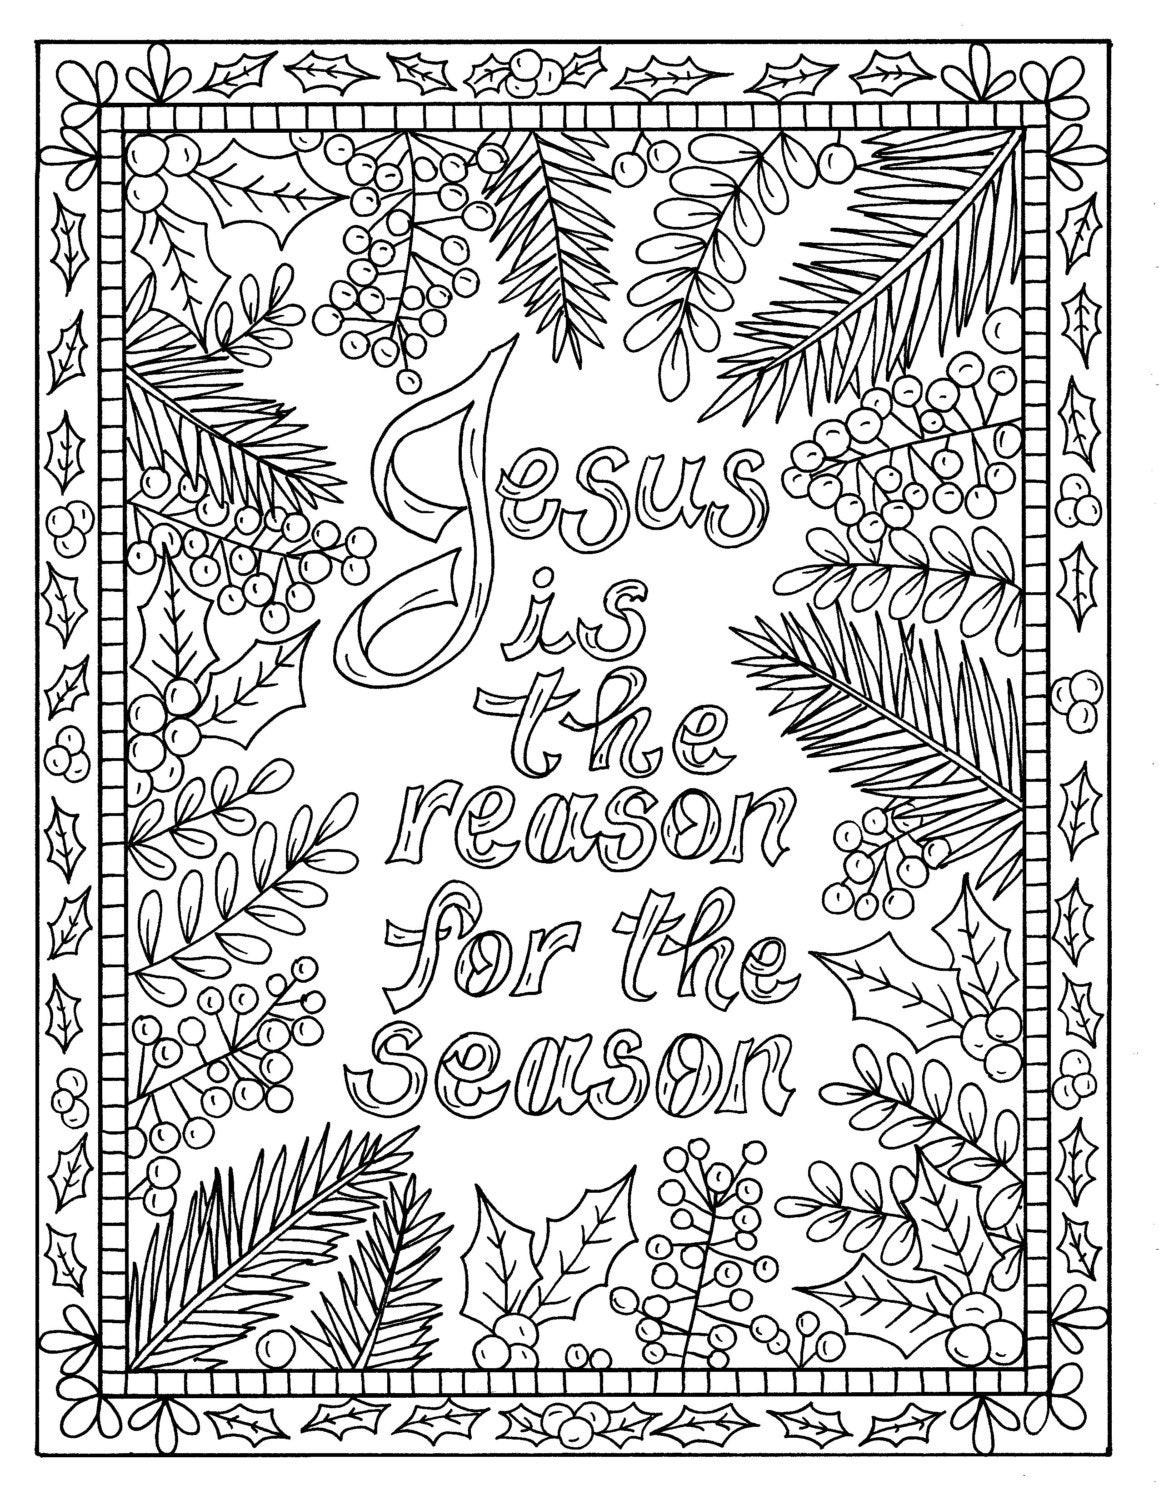 Christmas Coloring Pages For Adults
 5 Christian Coloring Pages for Christmas Color Book Digital